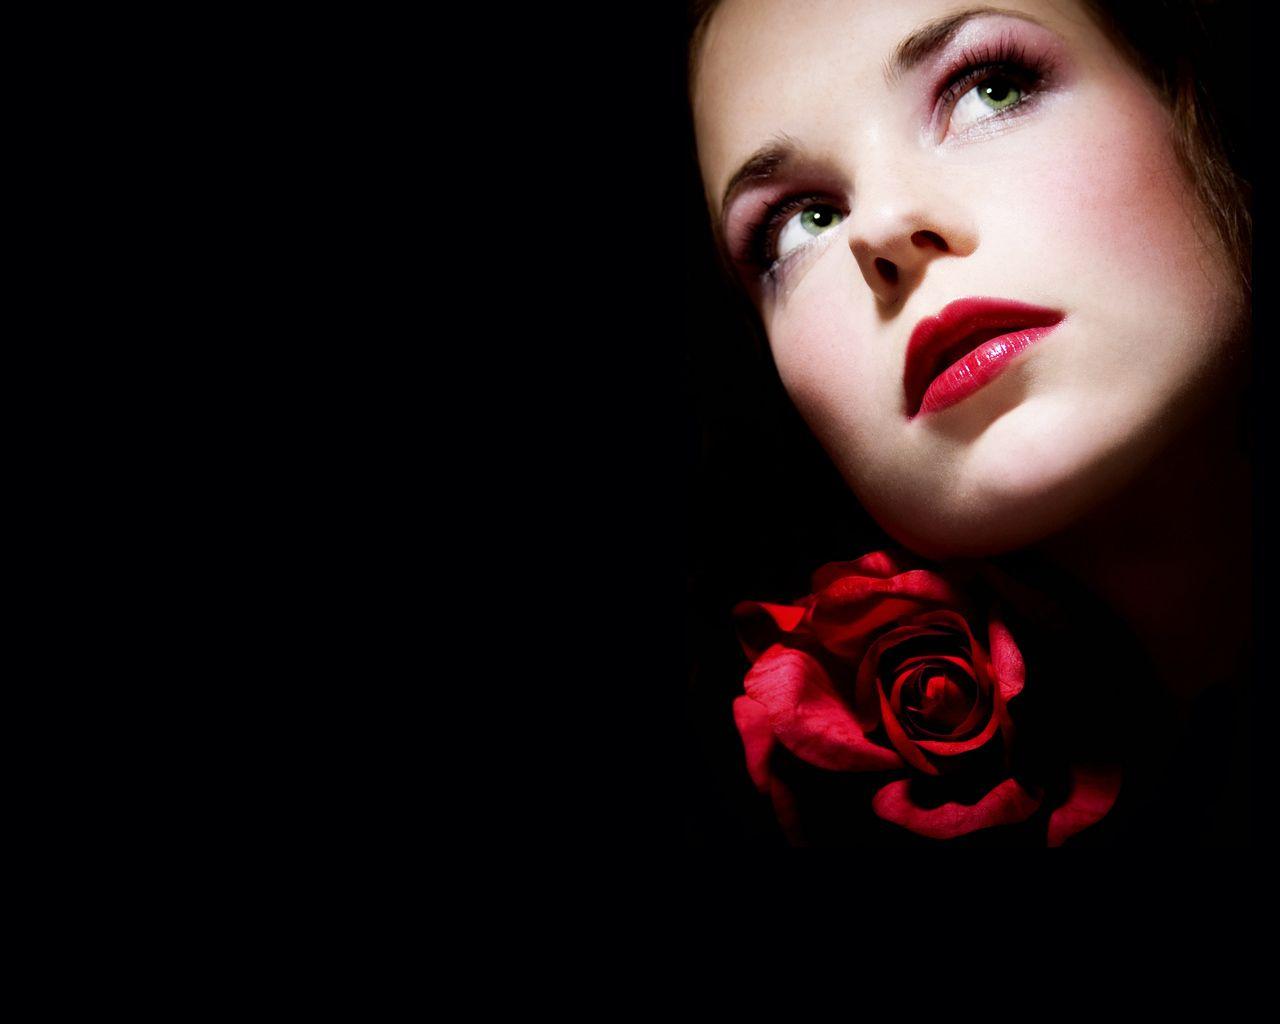 Wallpapers Beauty Woman Roses Wallpaper Cave 5555